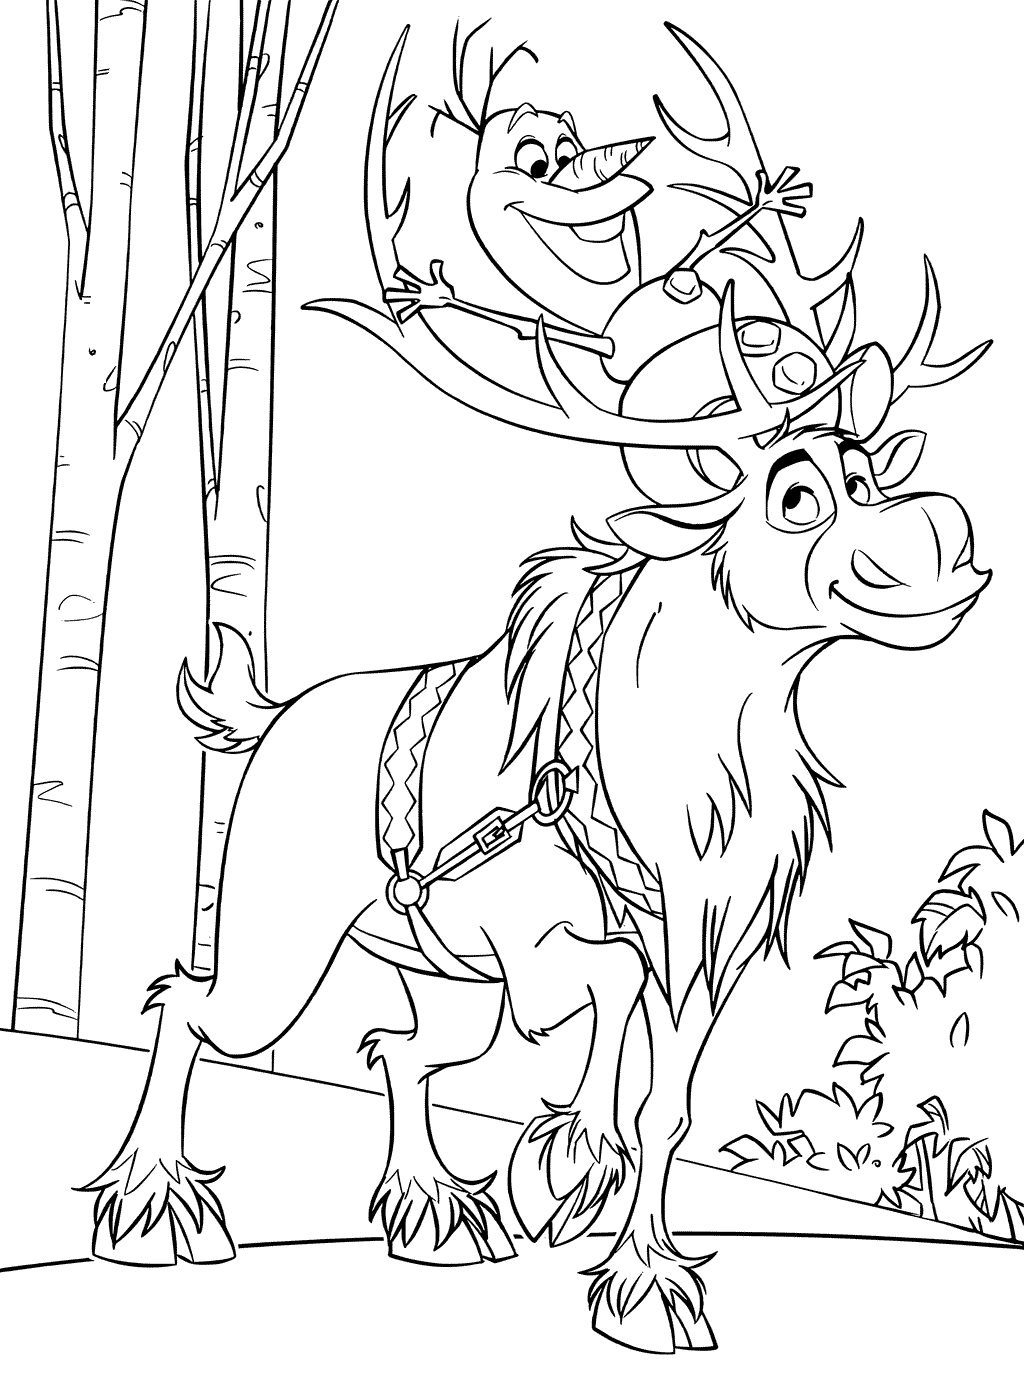 Snowman Olaf And Sven Reindeer Coloring Page